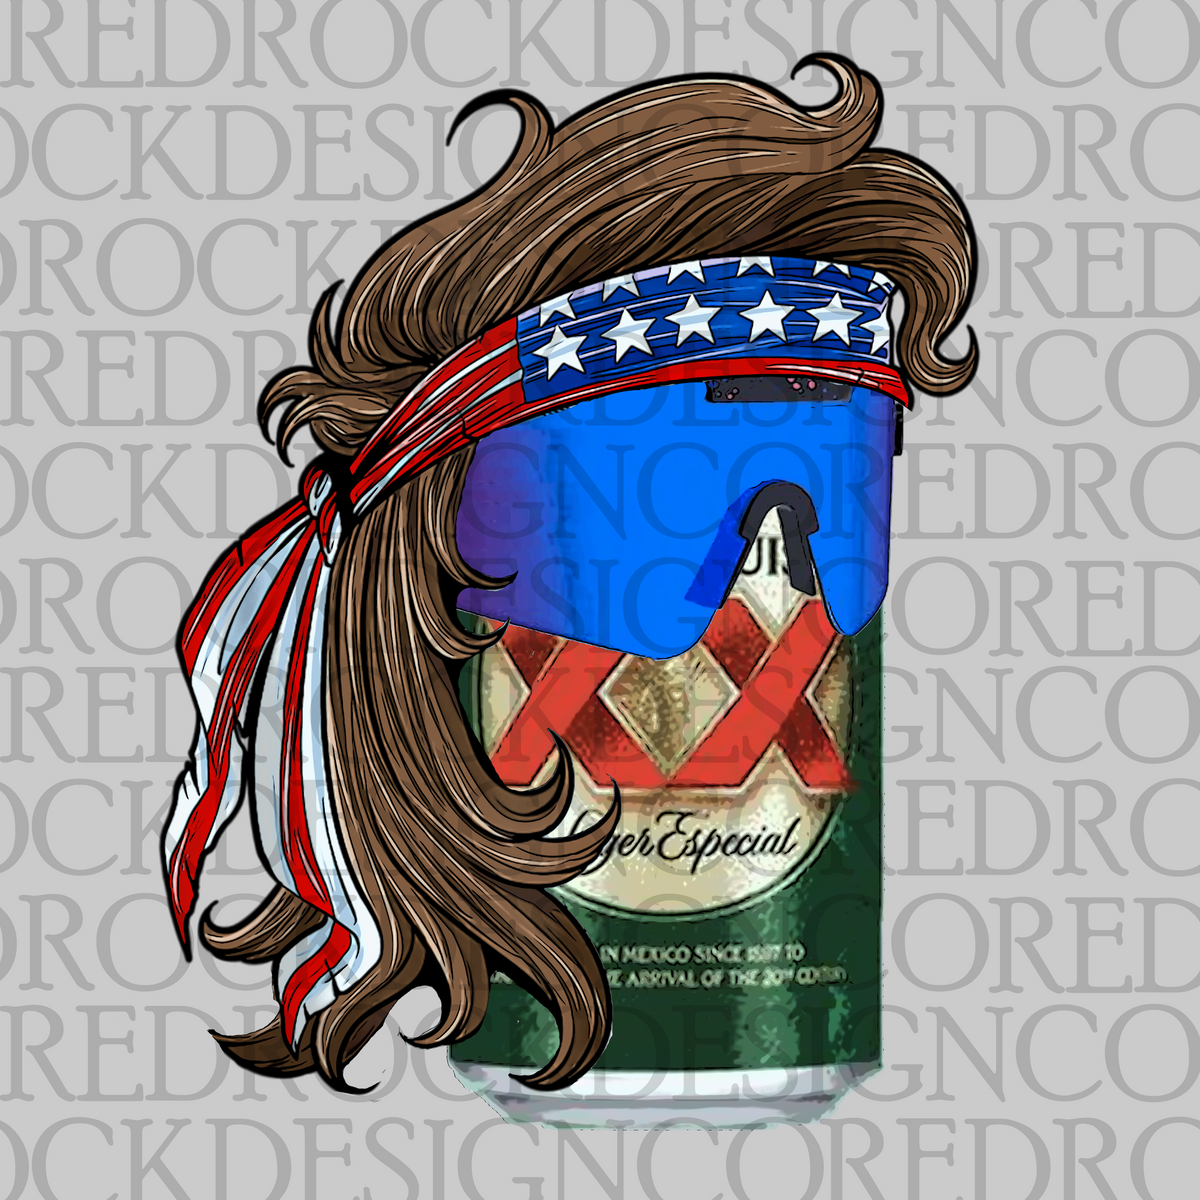 Dos Equis Fan Art Mullet Can Dd – Red Rock Design Co